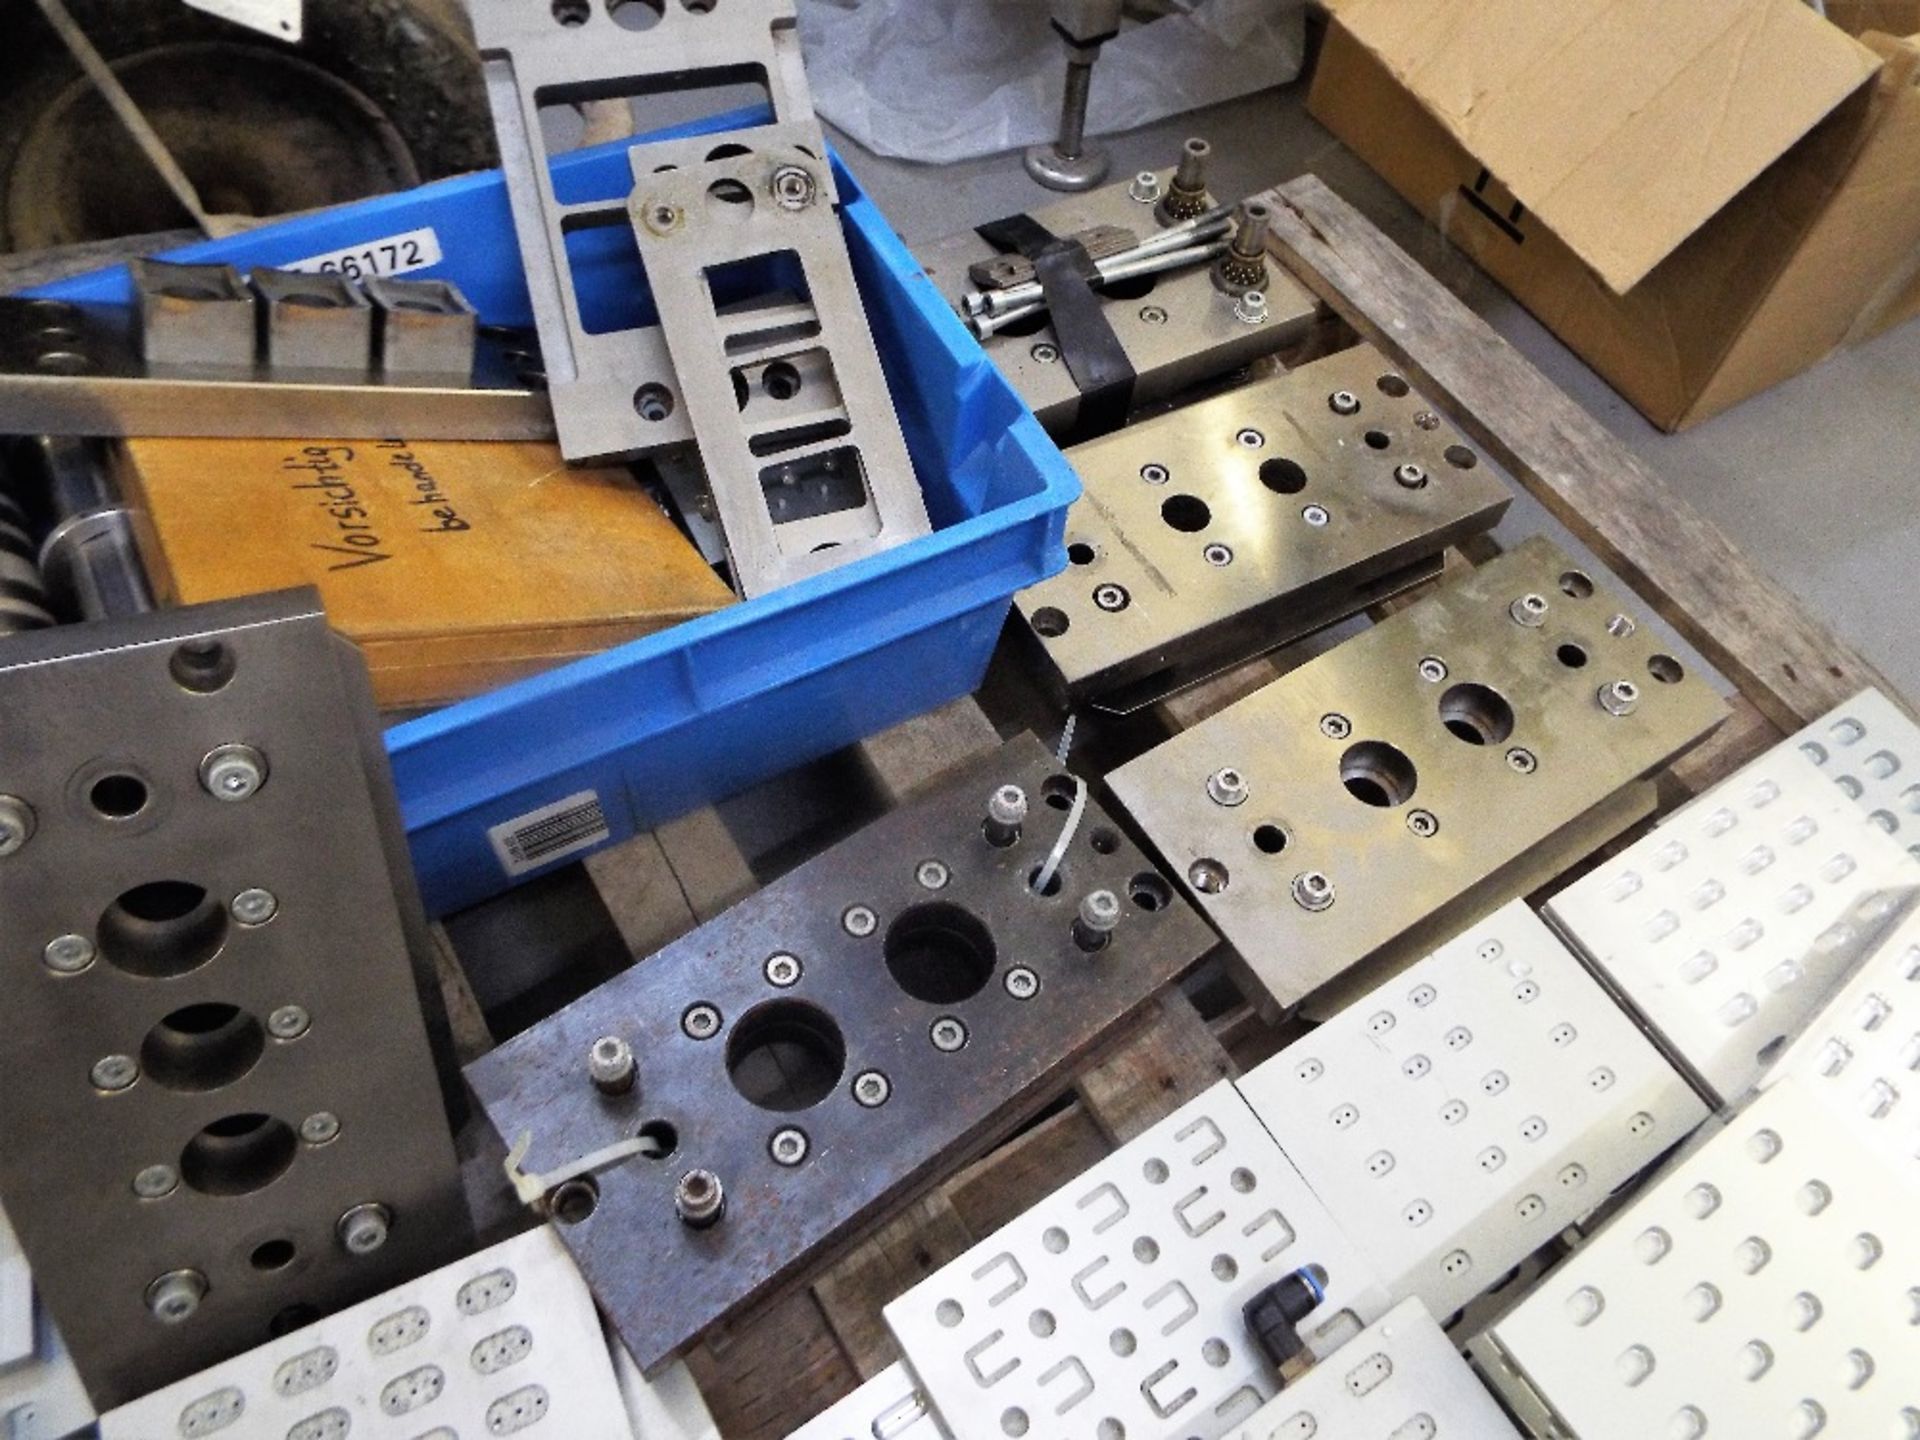 BLISTER PACKING MACHINERY MOULDS AND TOOLING - Image 7 of 7